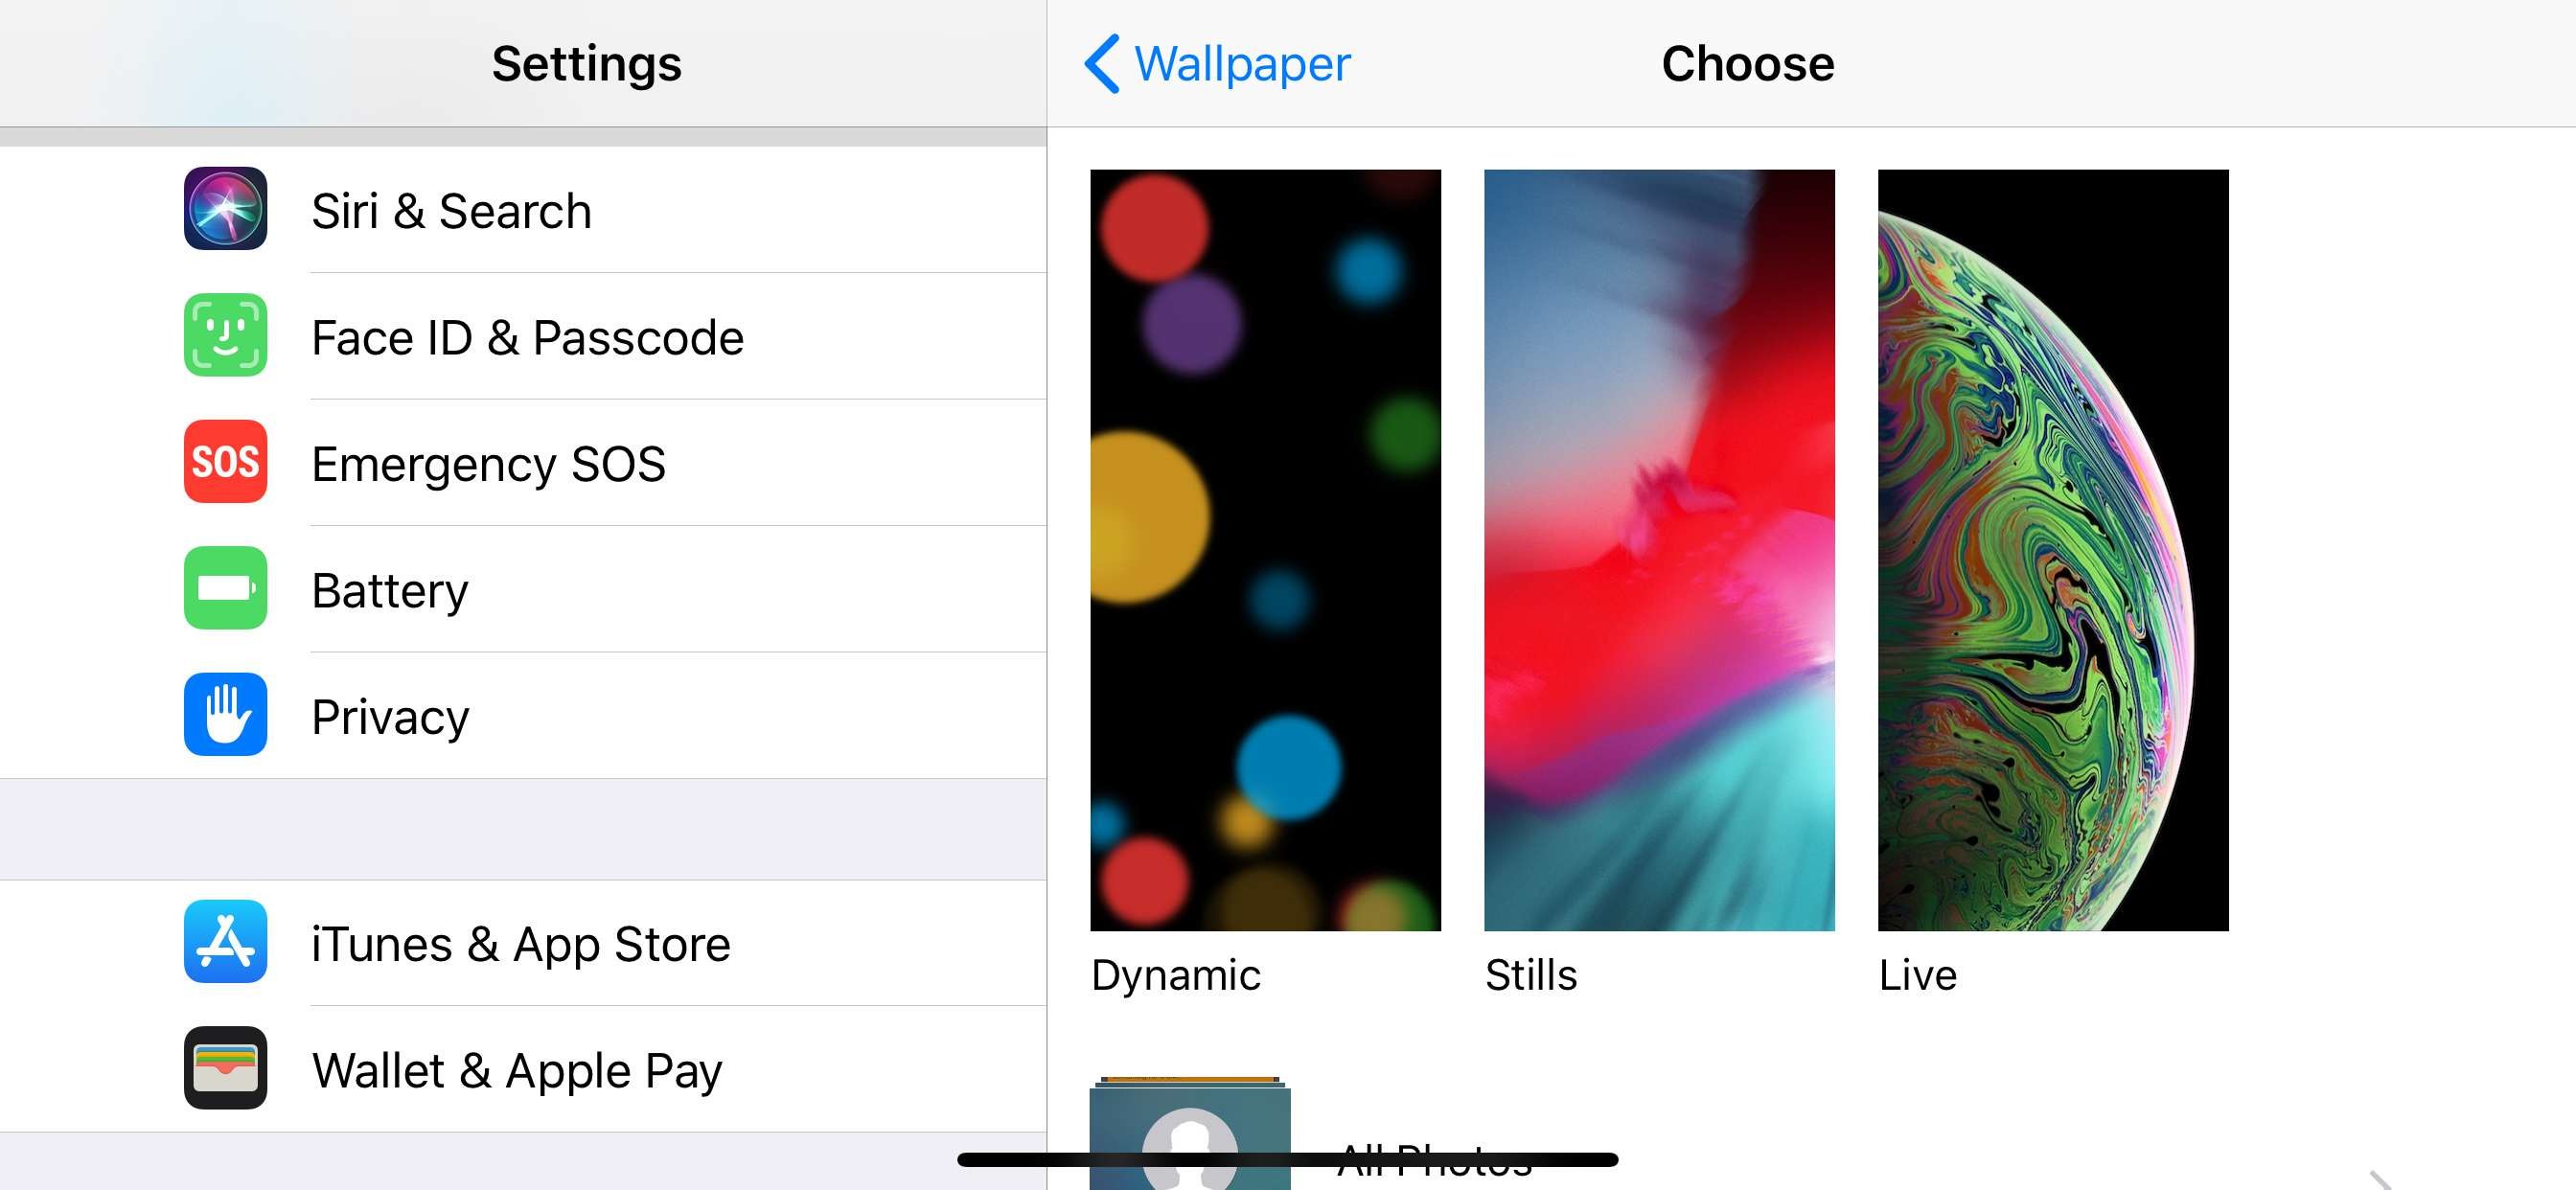 2688x1242 Dynamic, Stills, and Live photos in Wallpaper settings on iOS